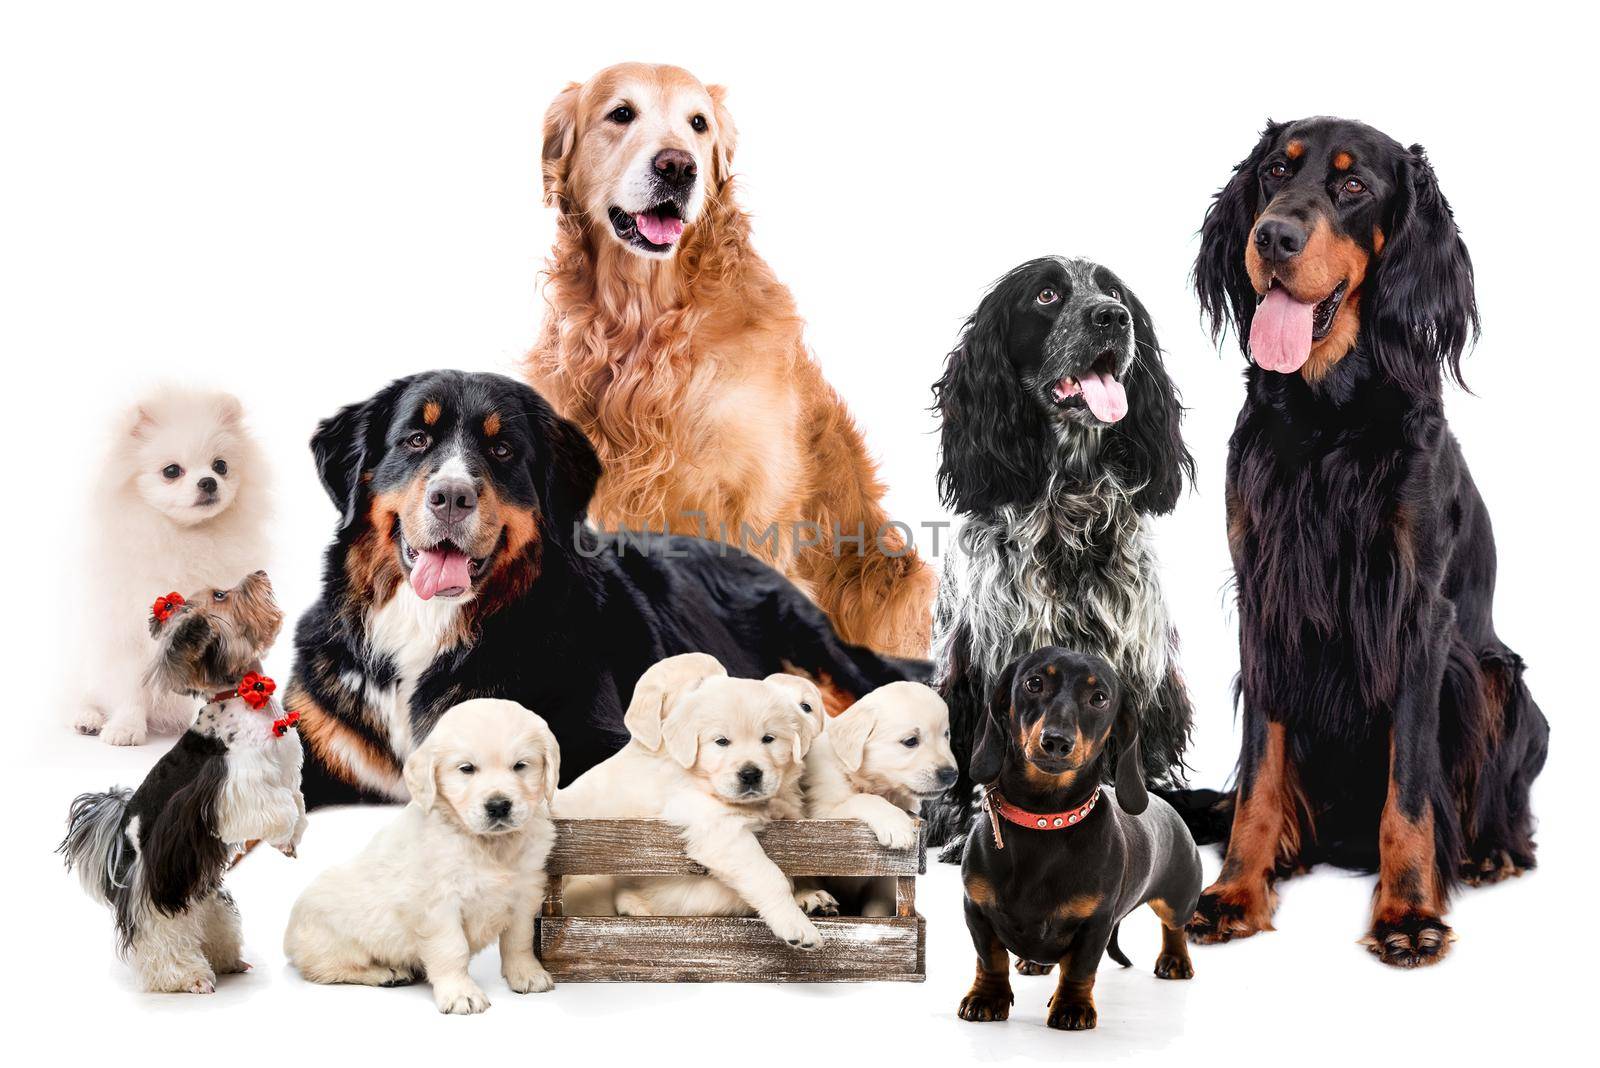 Collage with dogs sitting together isolated on white background. Golden retriever bernese scottish setter maltese doggy